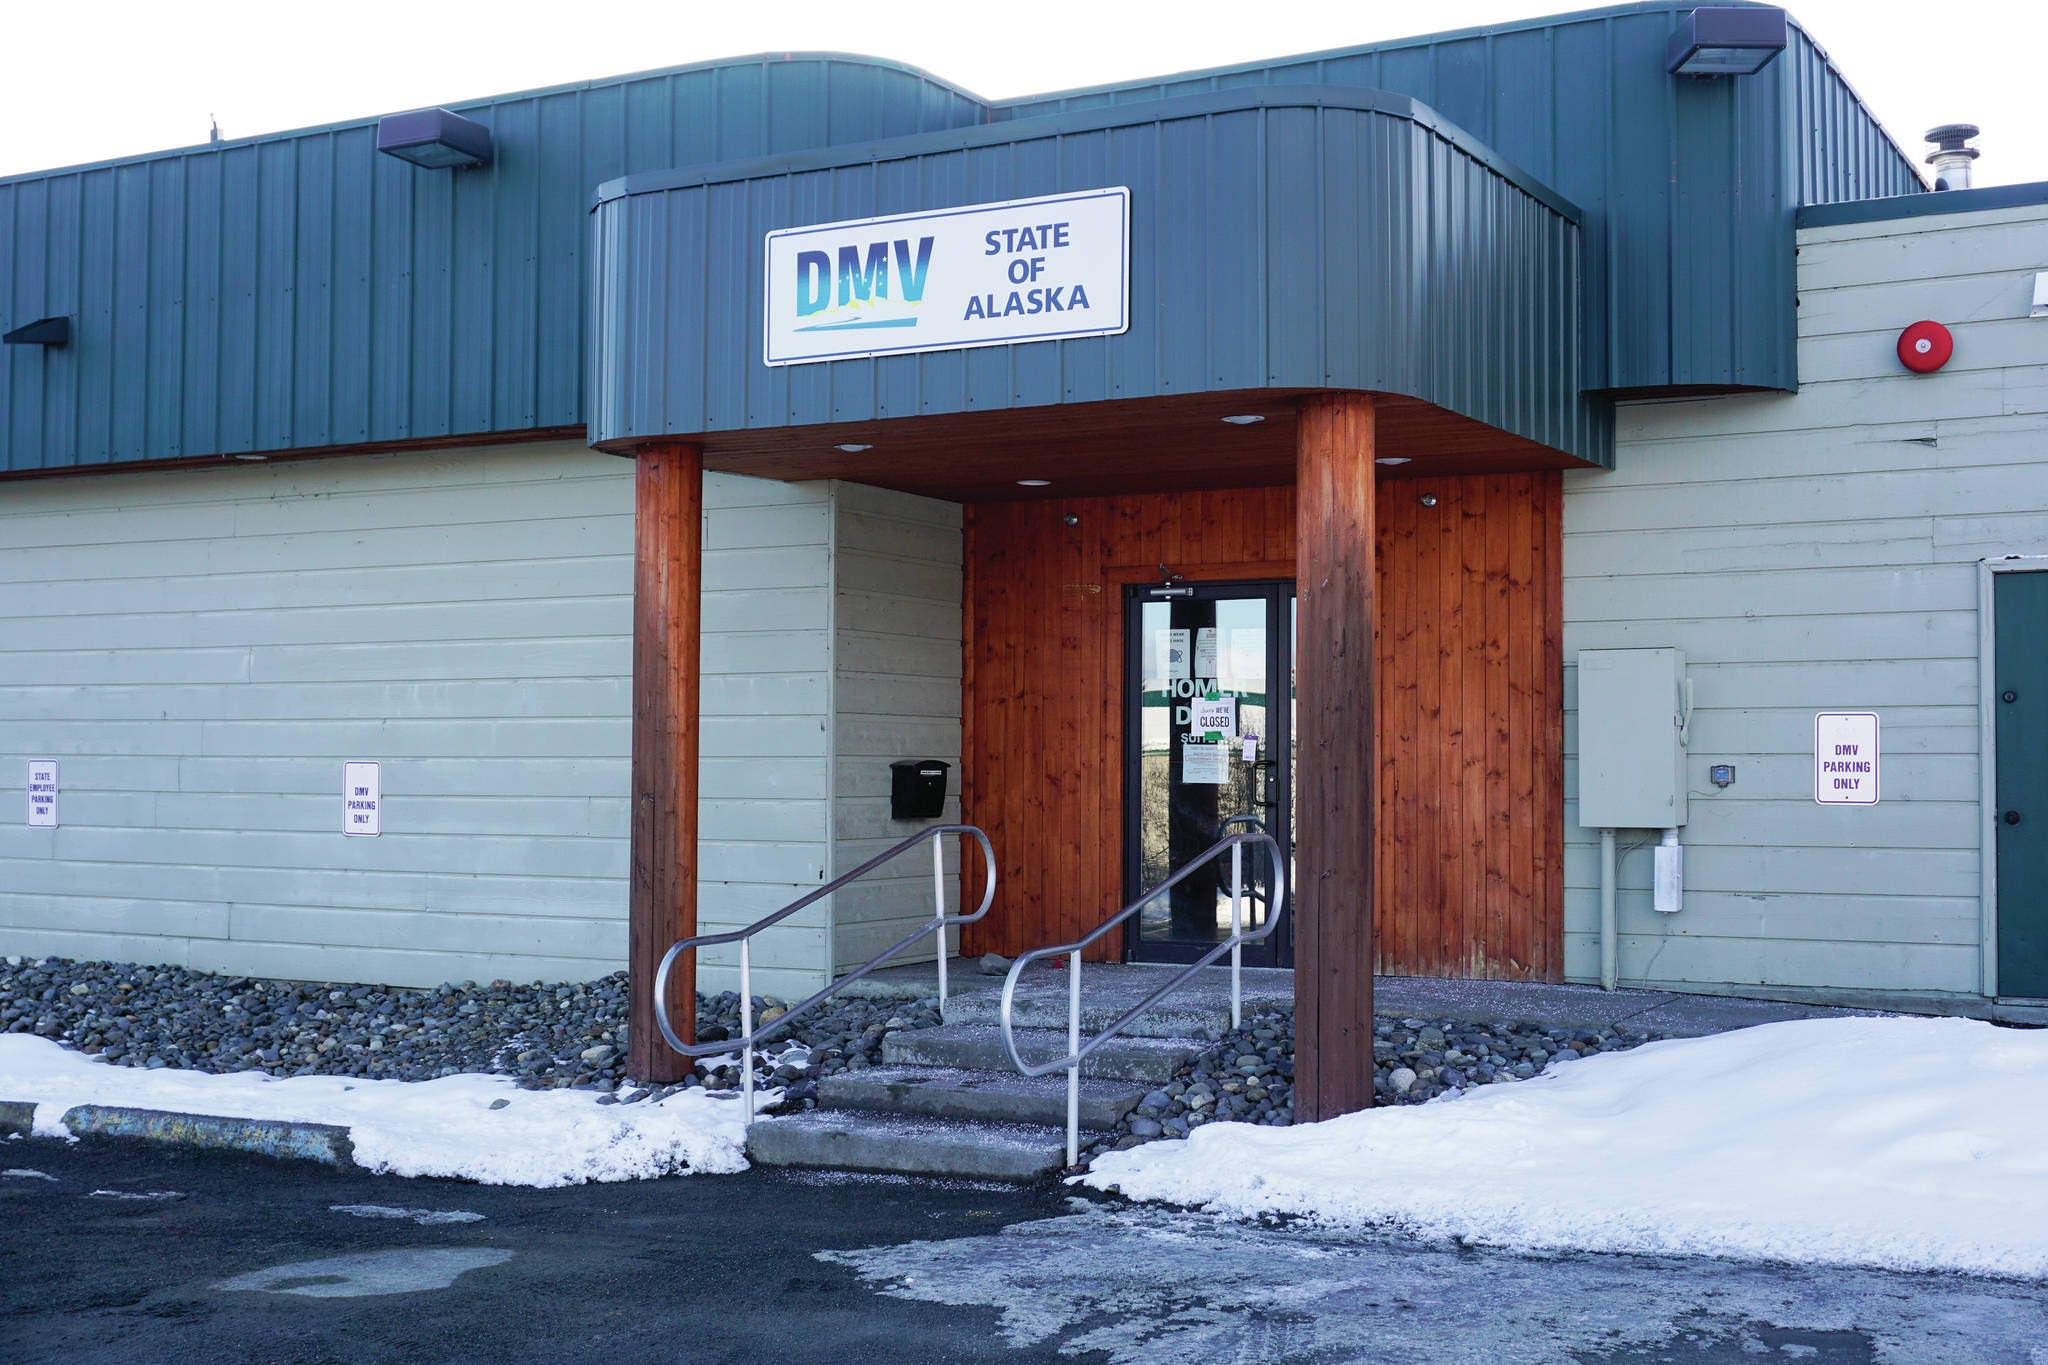 The Homer office of the Division of Motor Vehicles is seen after hours on Monday, March 15, 2021, in Homer, Alaska. (Photo by Michael Armstrong/Homer News)